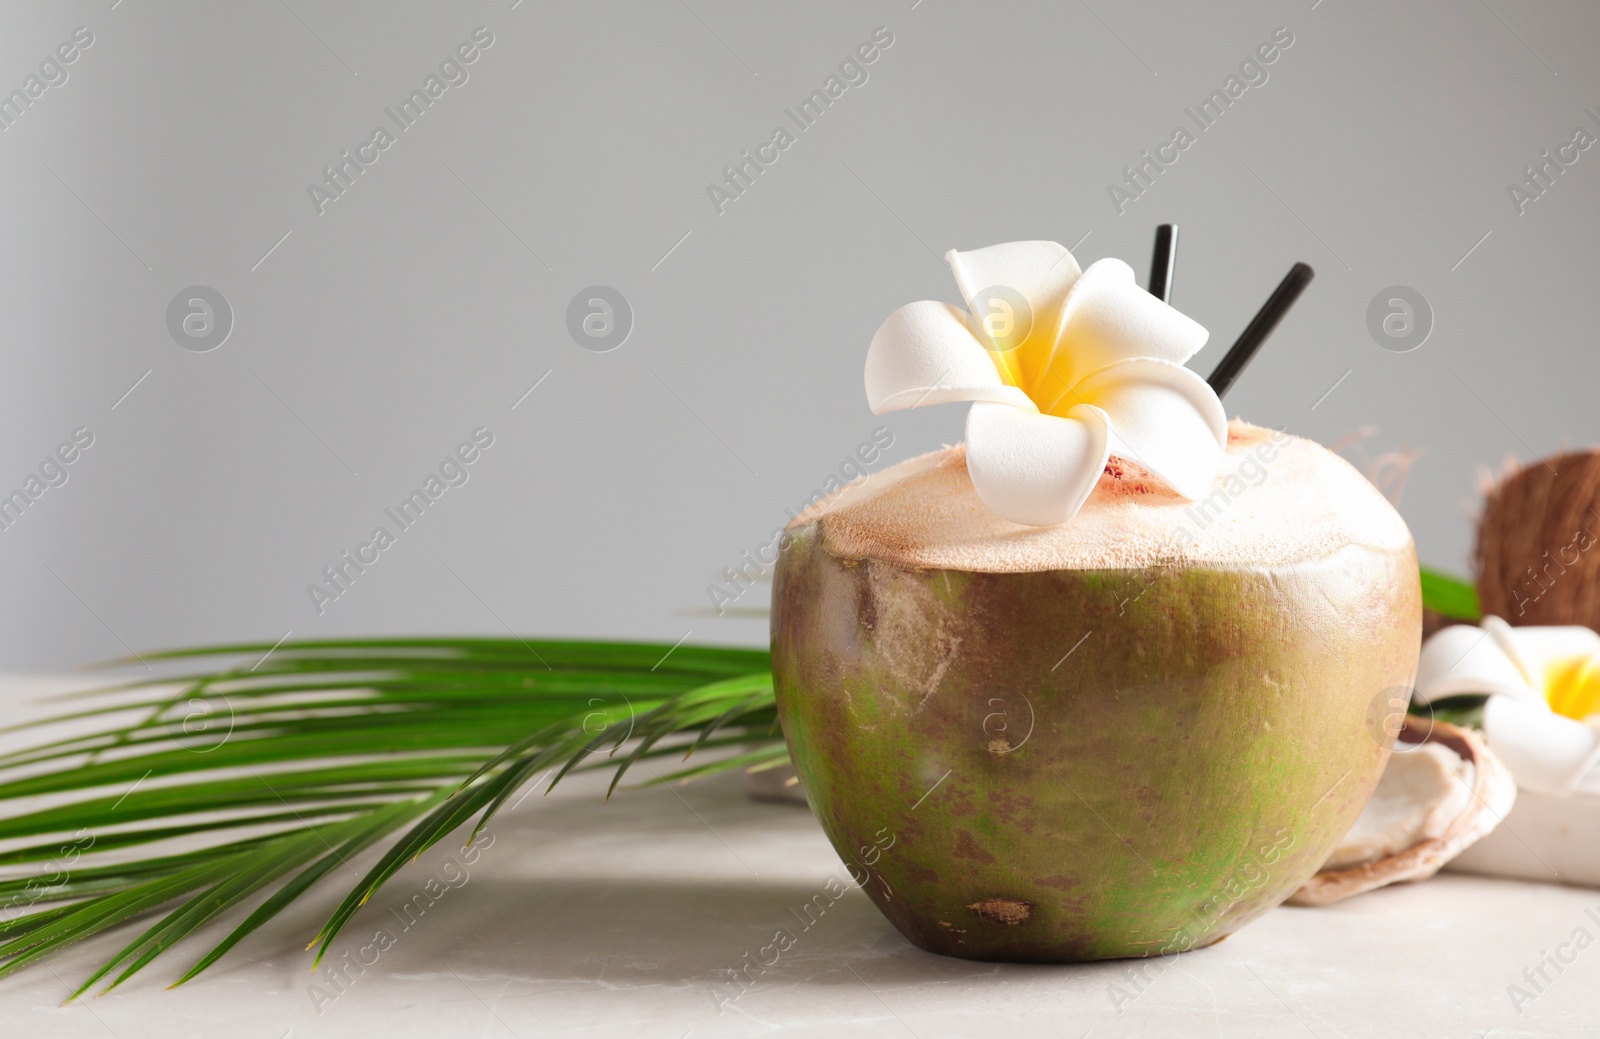 Photo of Fresh green coconut on table against gray background